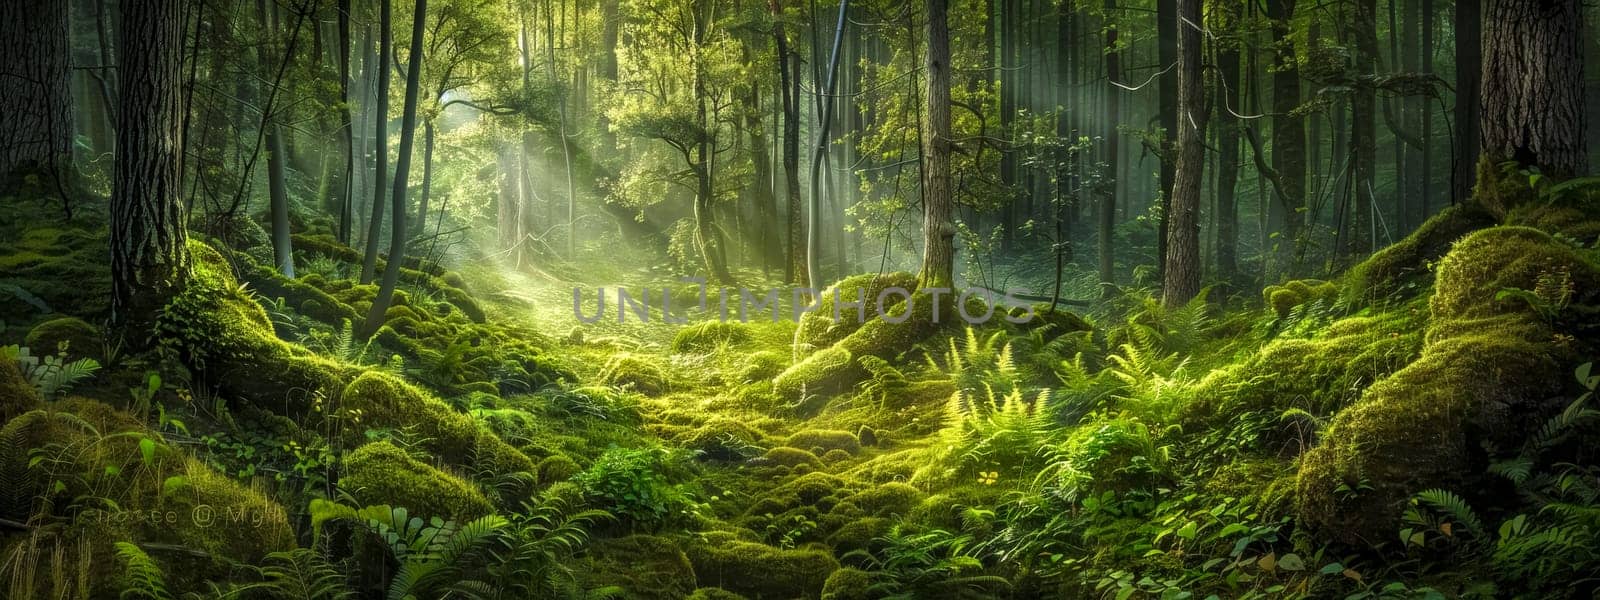 Ethereal sunbeams filter through a lush, green forest, highlighting the moss-covered ground